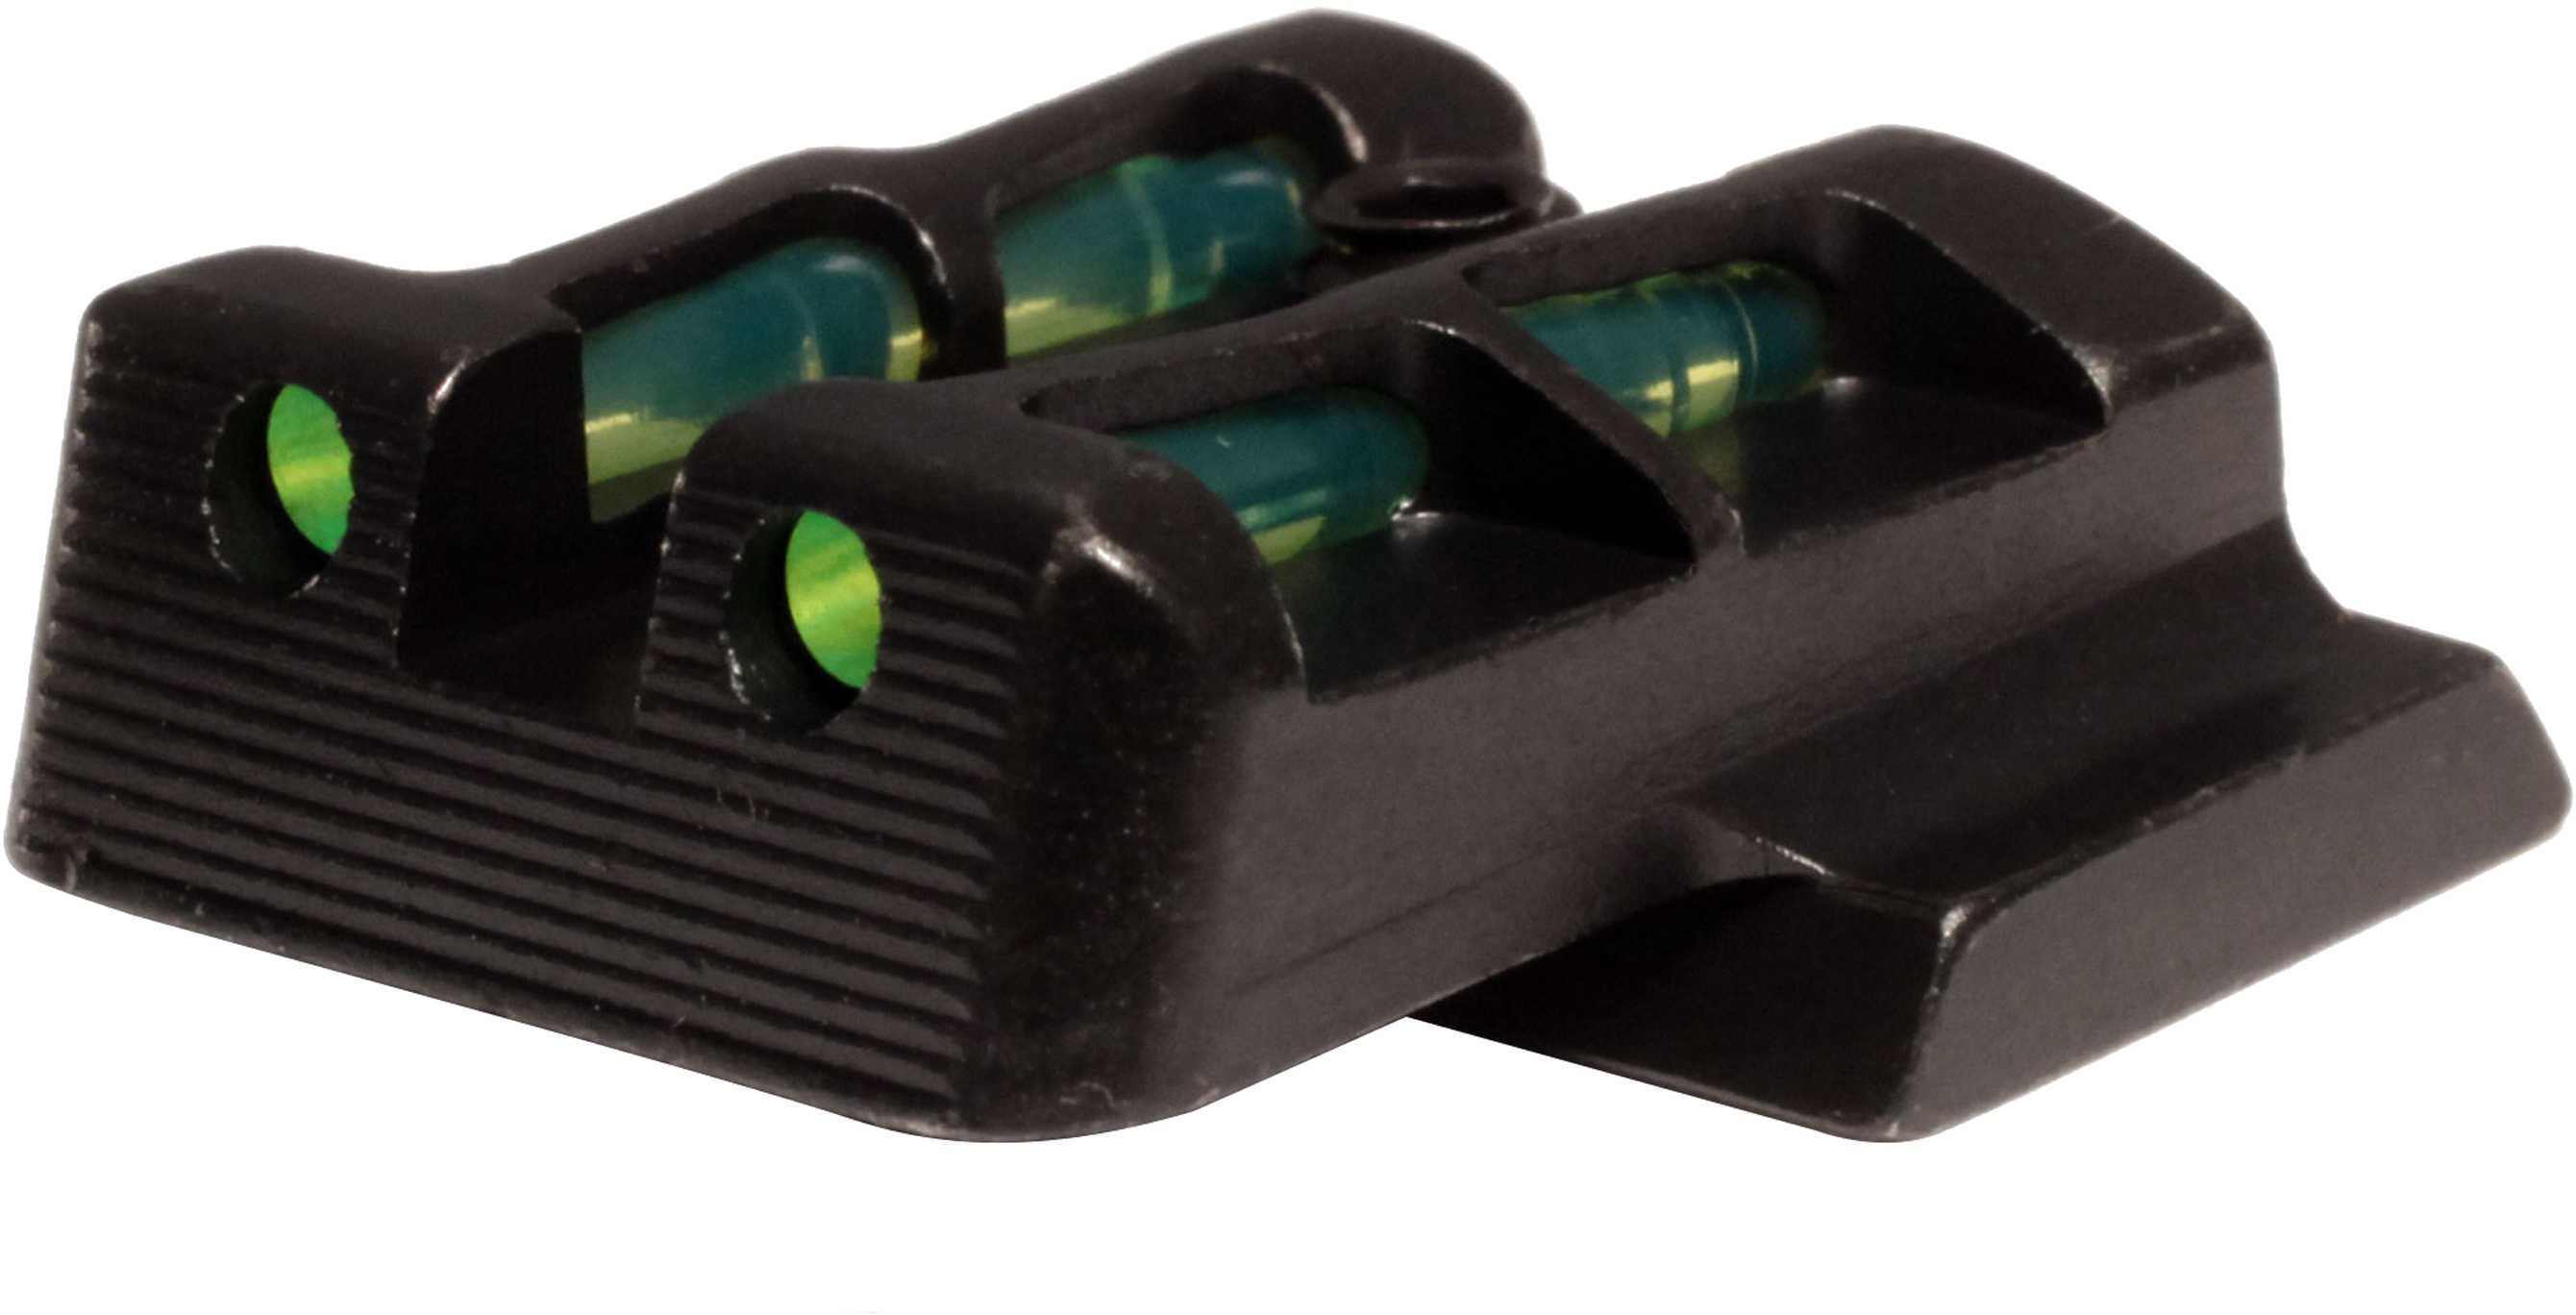 HiViz Sight Systems Hi-viz Litewave Fits S&w M&p Full Size & Compact Except 22 Rear Only Includes Litepipes